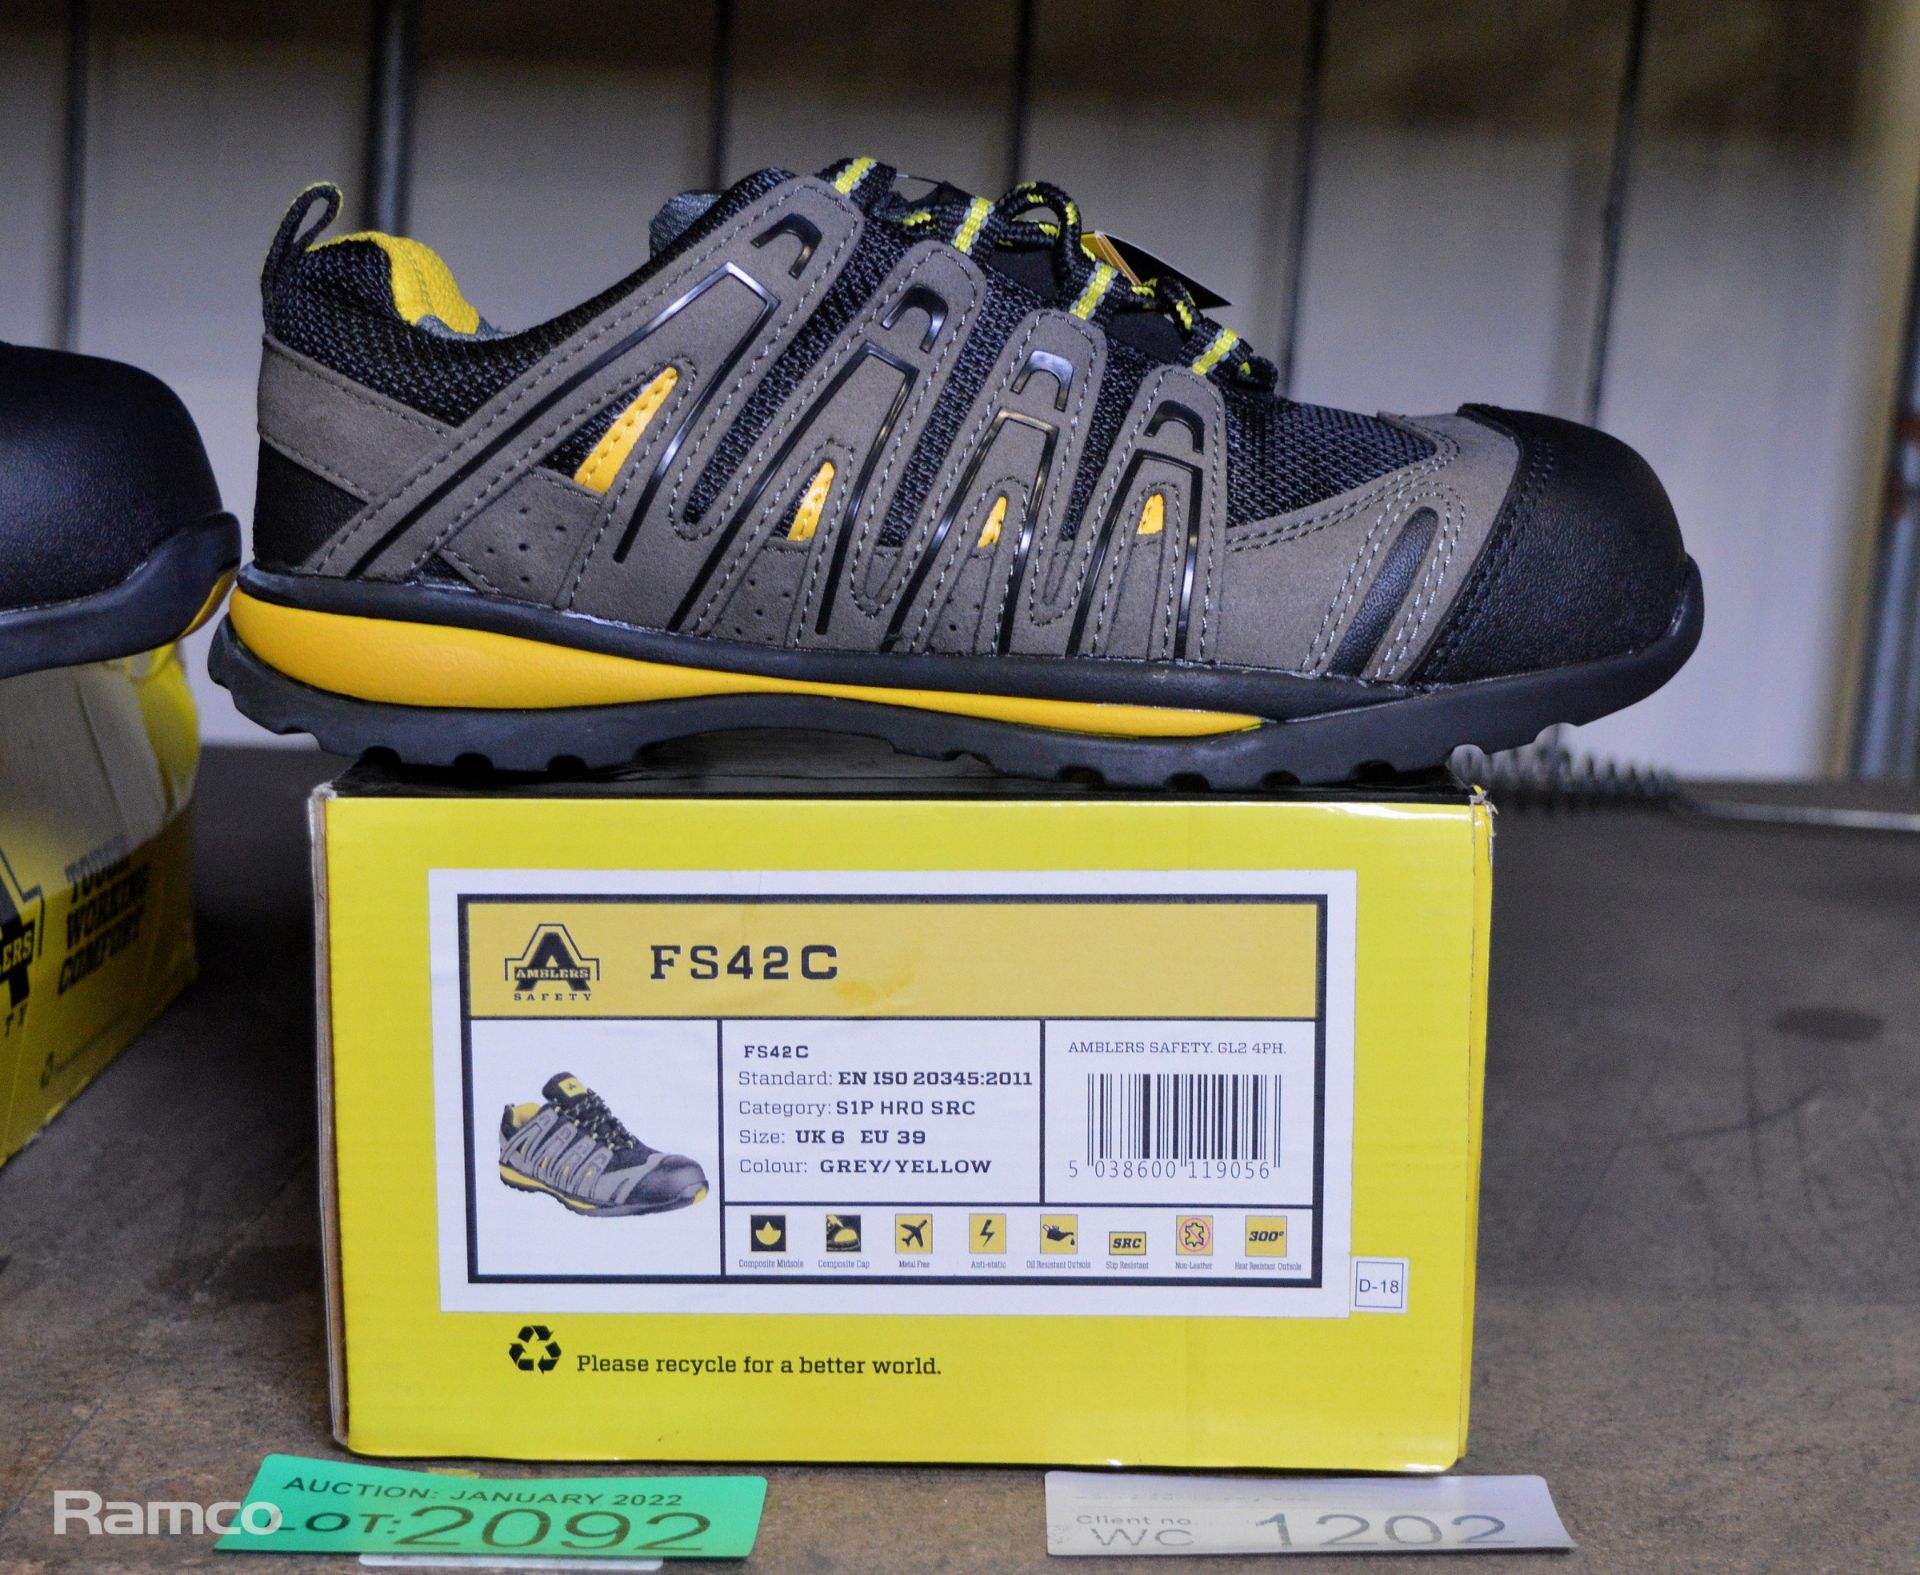 2x Pairs of Ambler FS42C safety shoes - 1x size 6 & 1x size 12 - Image 3 of 3